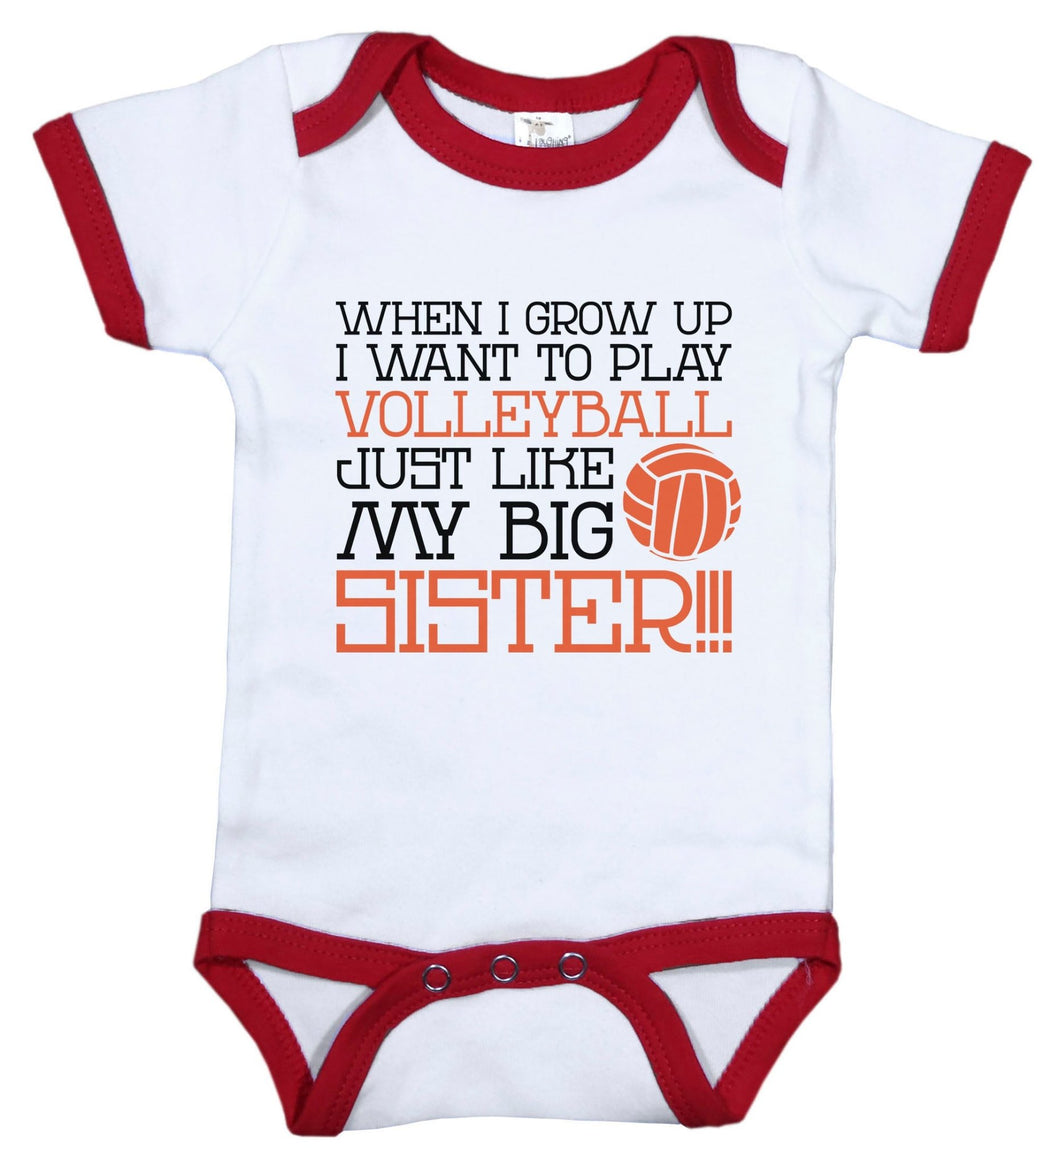 When I Grow Up I Want To Play Volleyball Just Like My Big Sister / Volleyball Ringer Onesie - Baffle